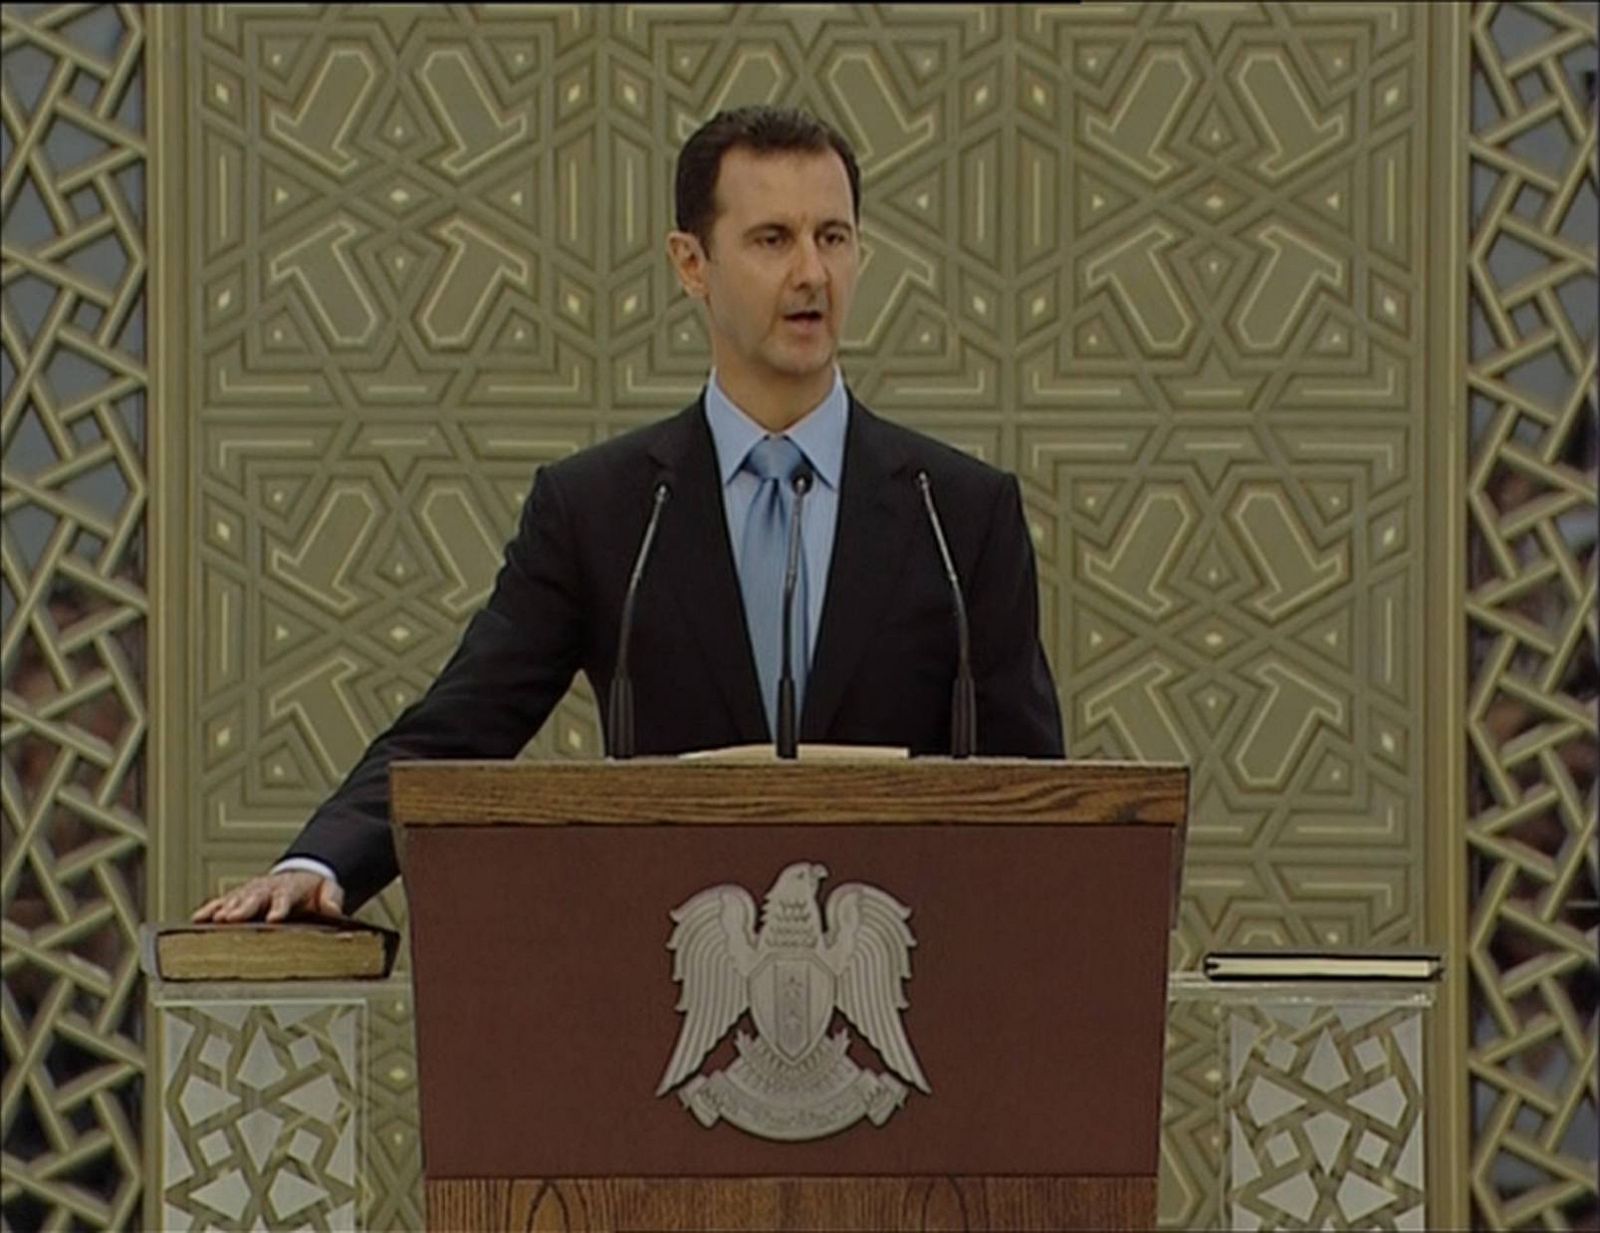 Still image from video shows Syria's President Bashar al-Assad speaking as he is sworn in for a new seven-year term at the presidential palace in Damascus